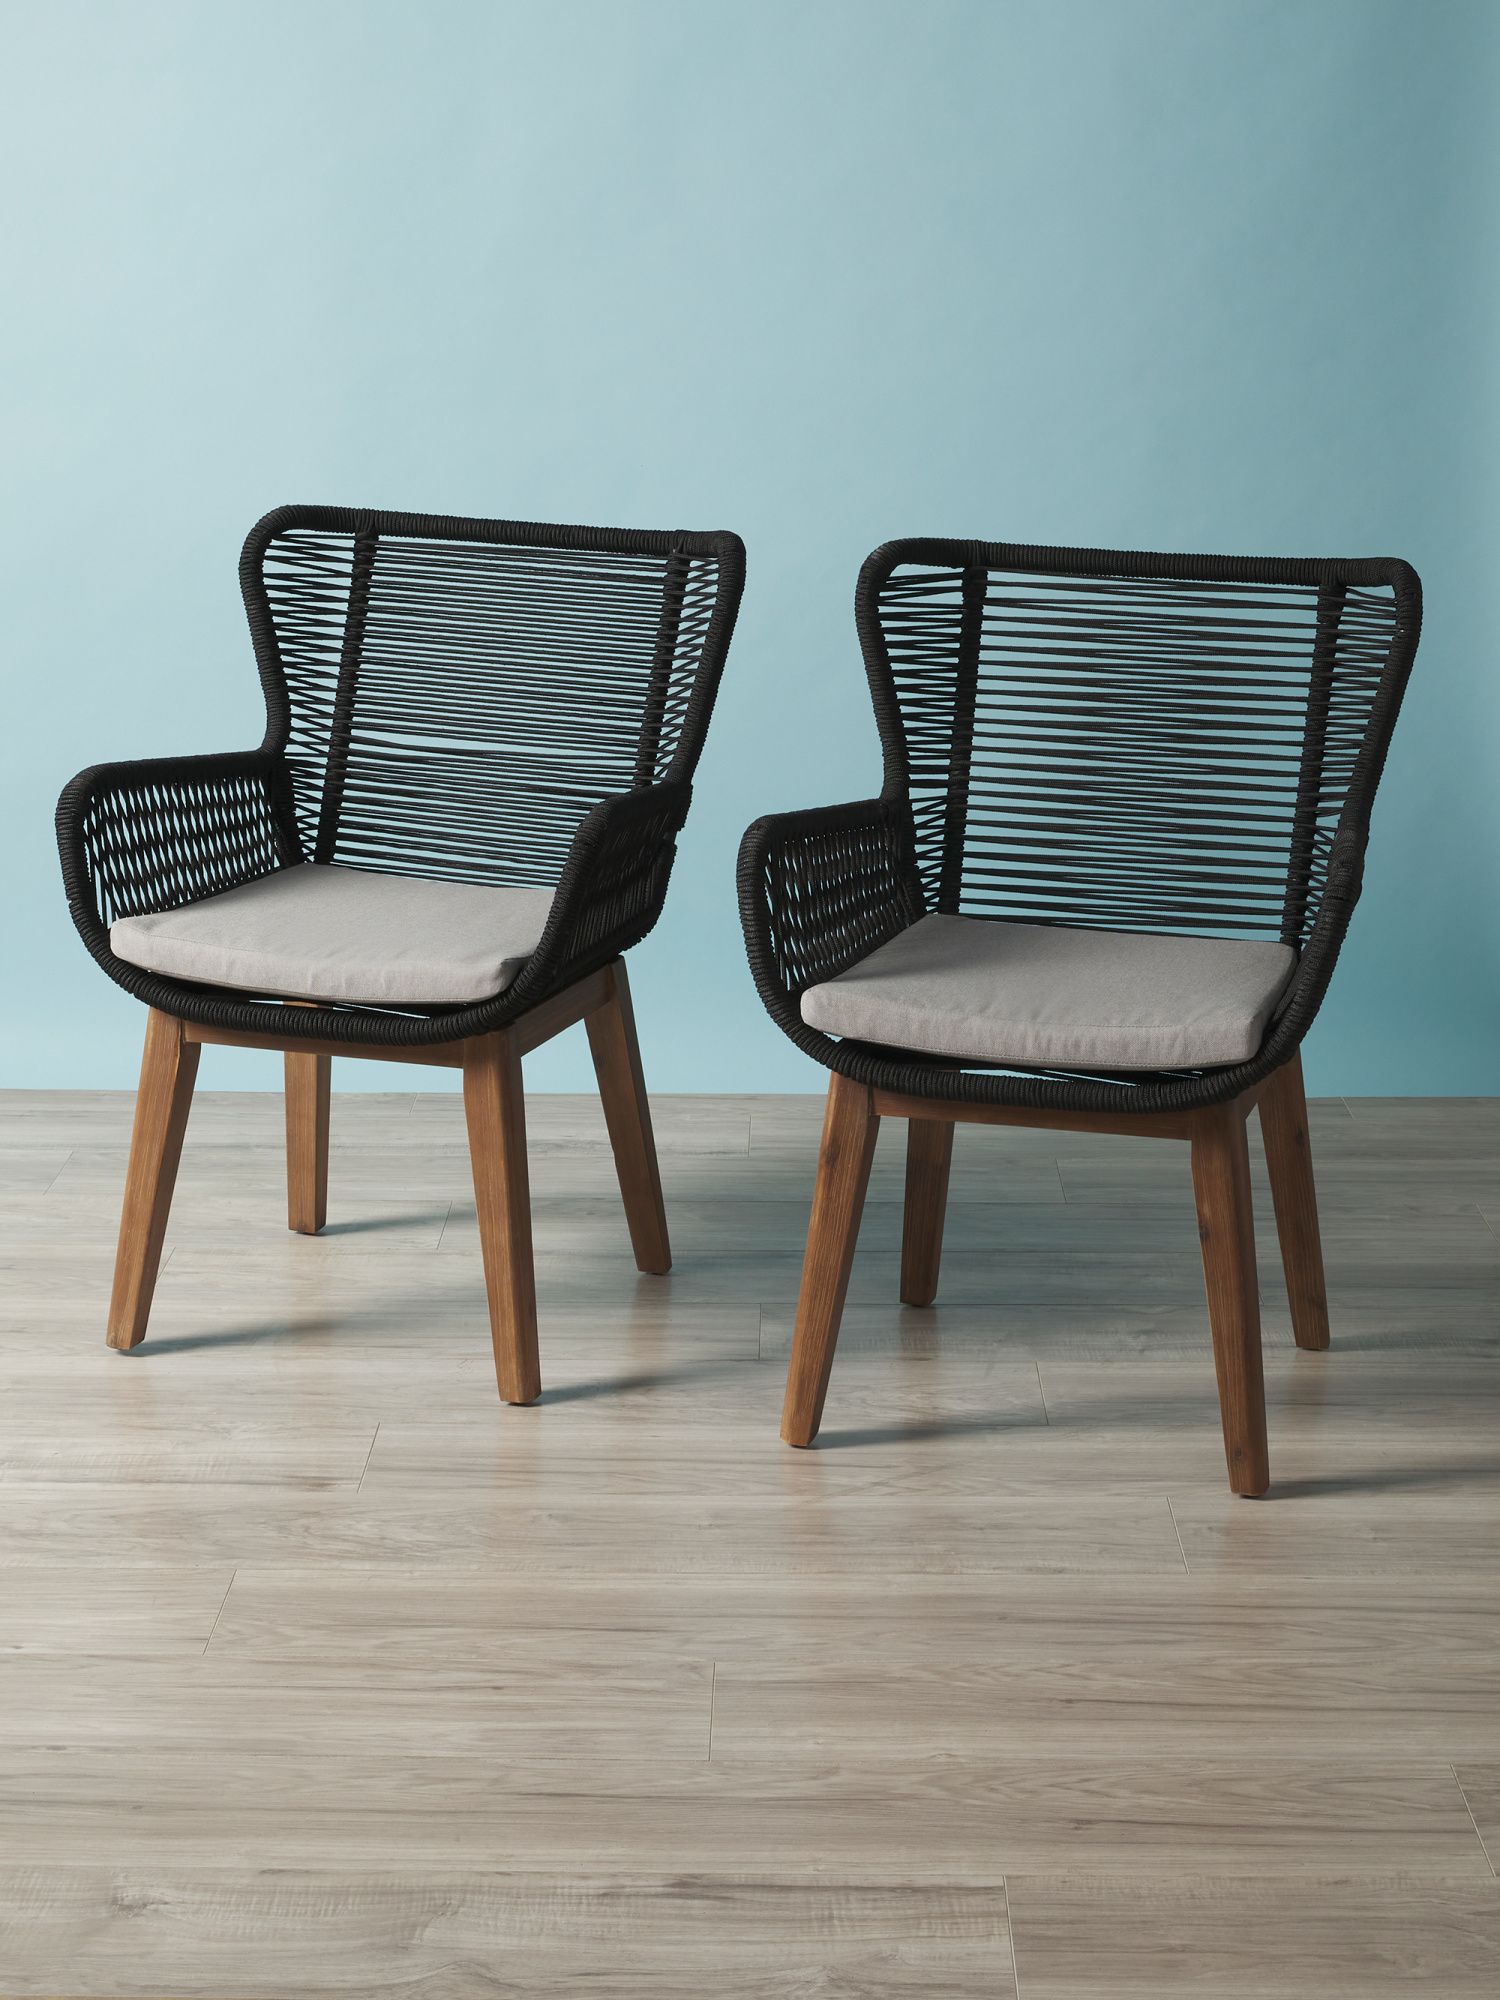 2pk 34.5in Acacia Wood Woven Rope Dining Chairs | Outdoor | HomeGoods | HomeGoods